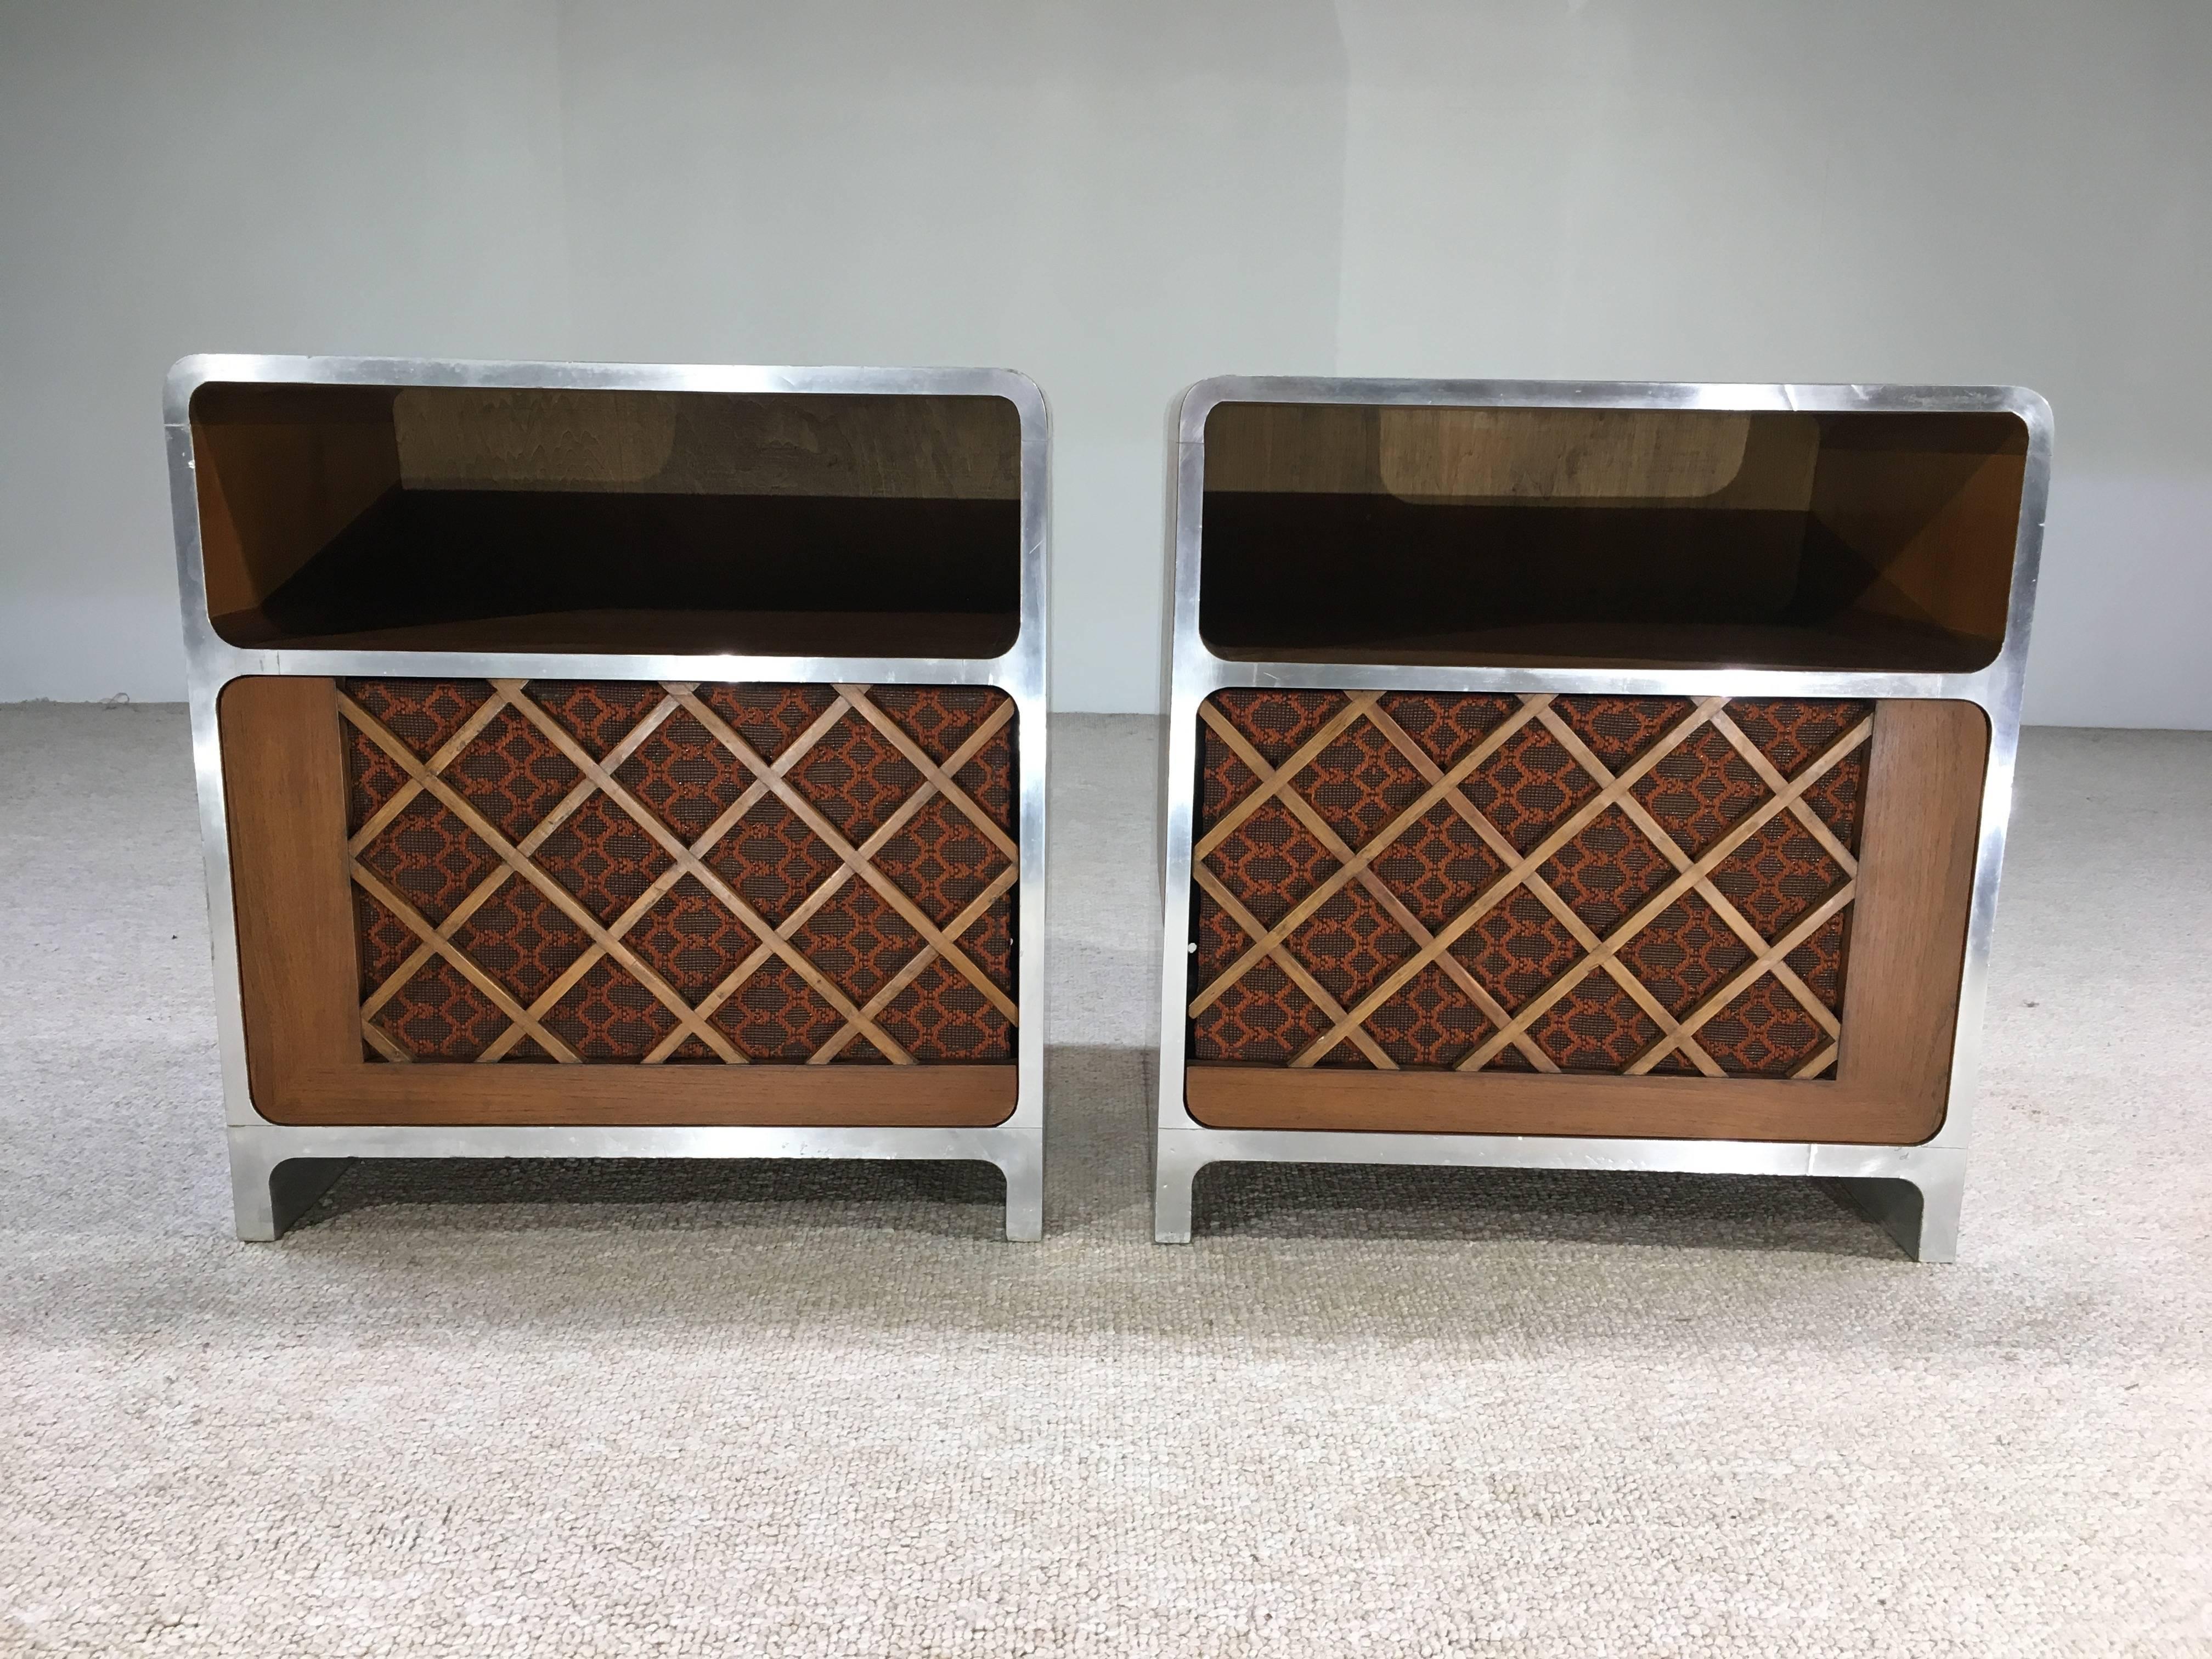 An awesome pair of console and speaker cabinets that we've never seen before. The speaker screens pop off via magnets and the backs are curved out allowing for multiple speaker sizes. Cloth screens let sound pass right through the screens clearly.